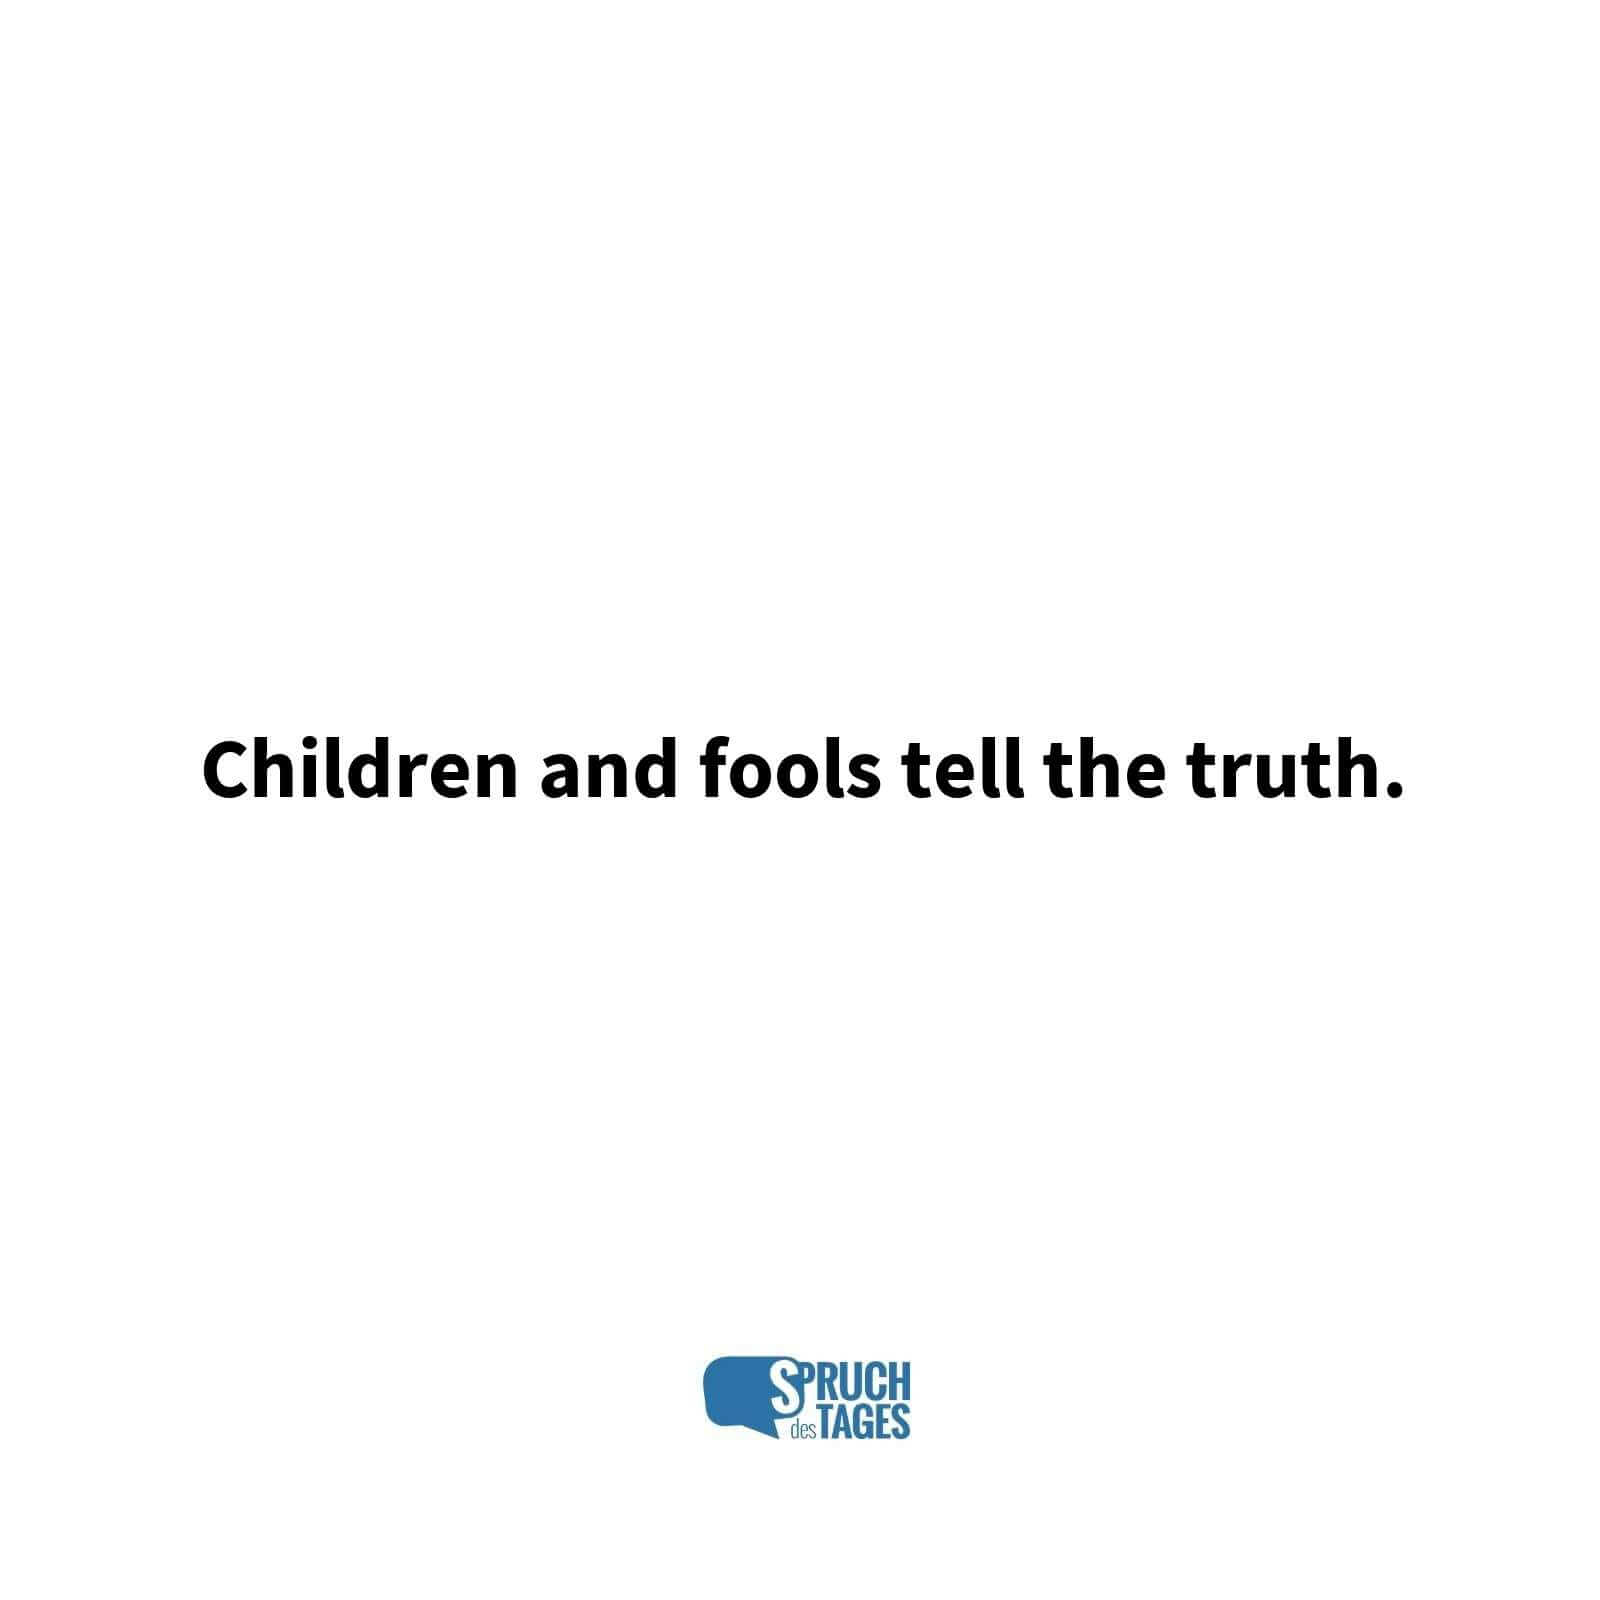 Children and fools tell the truth.